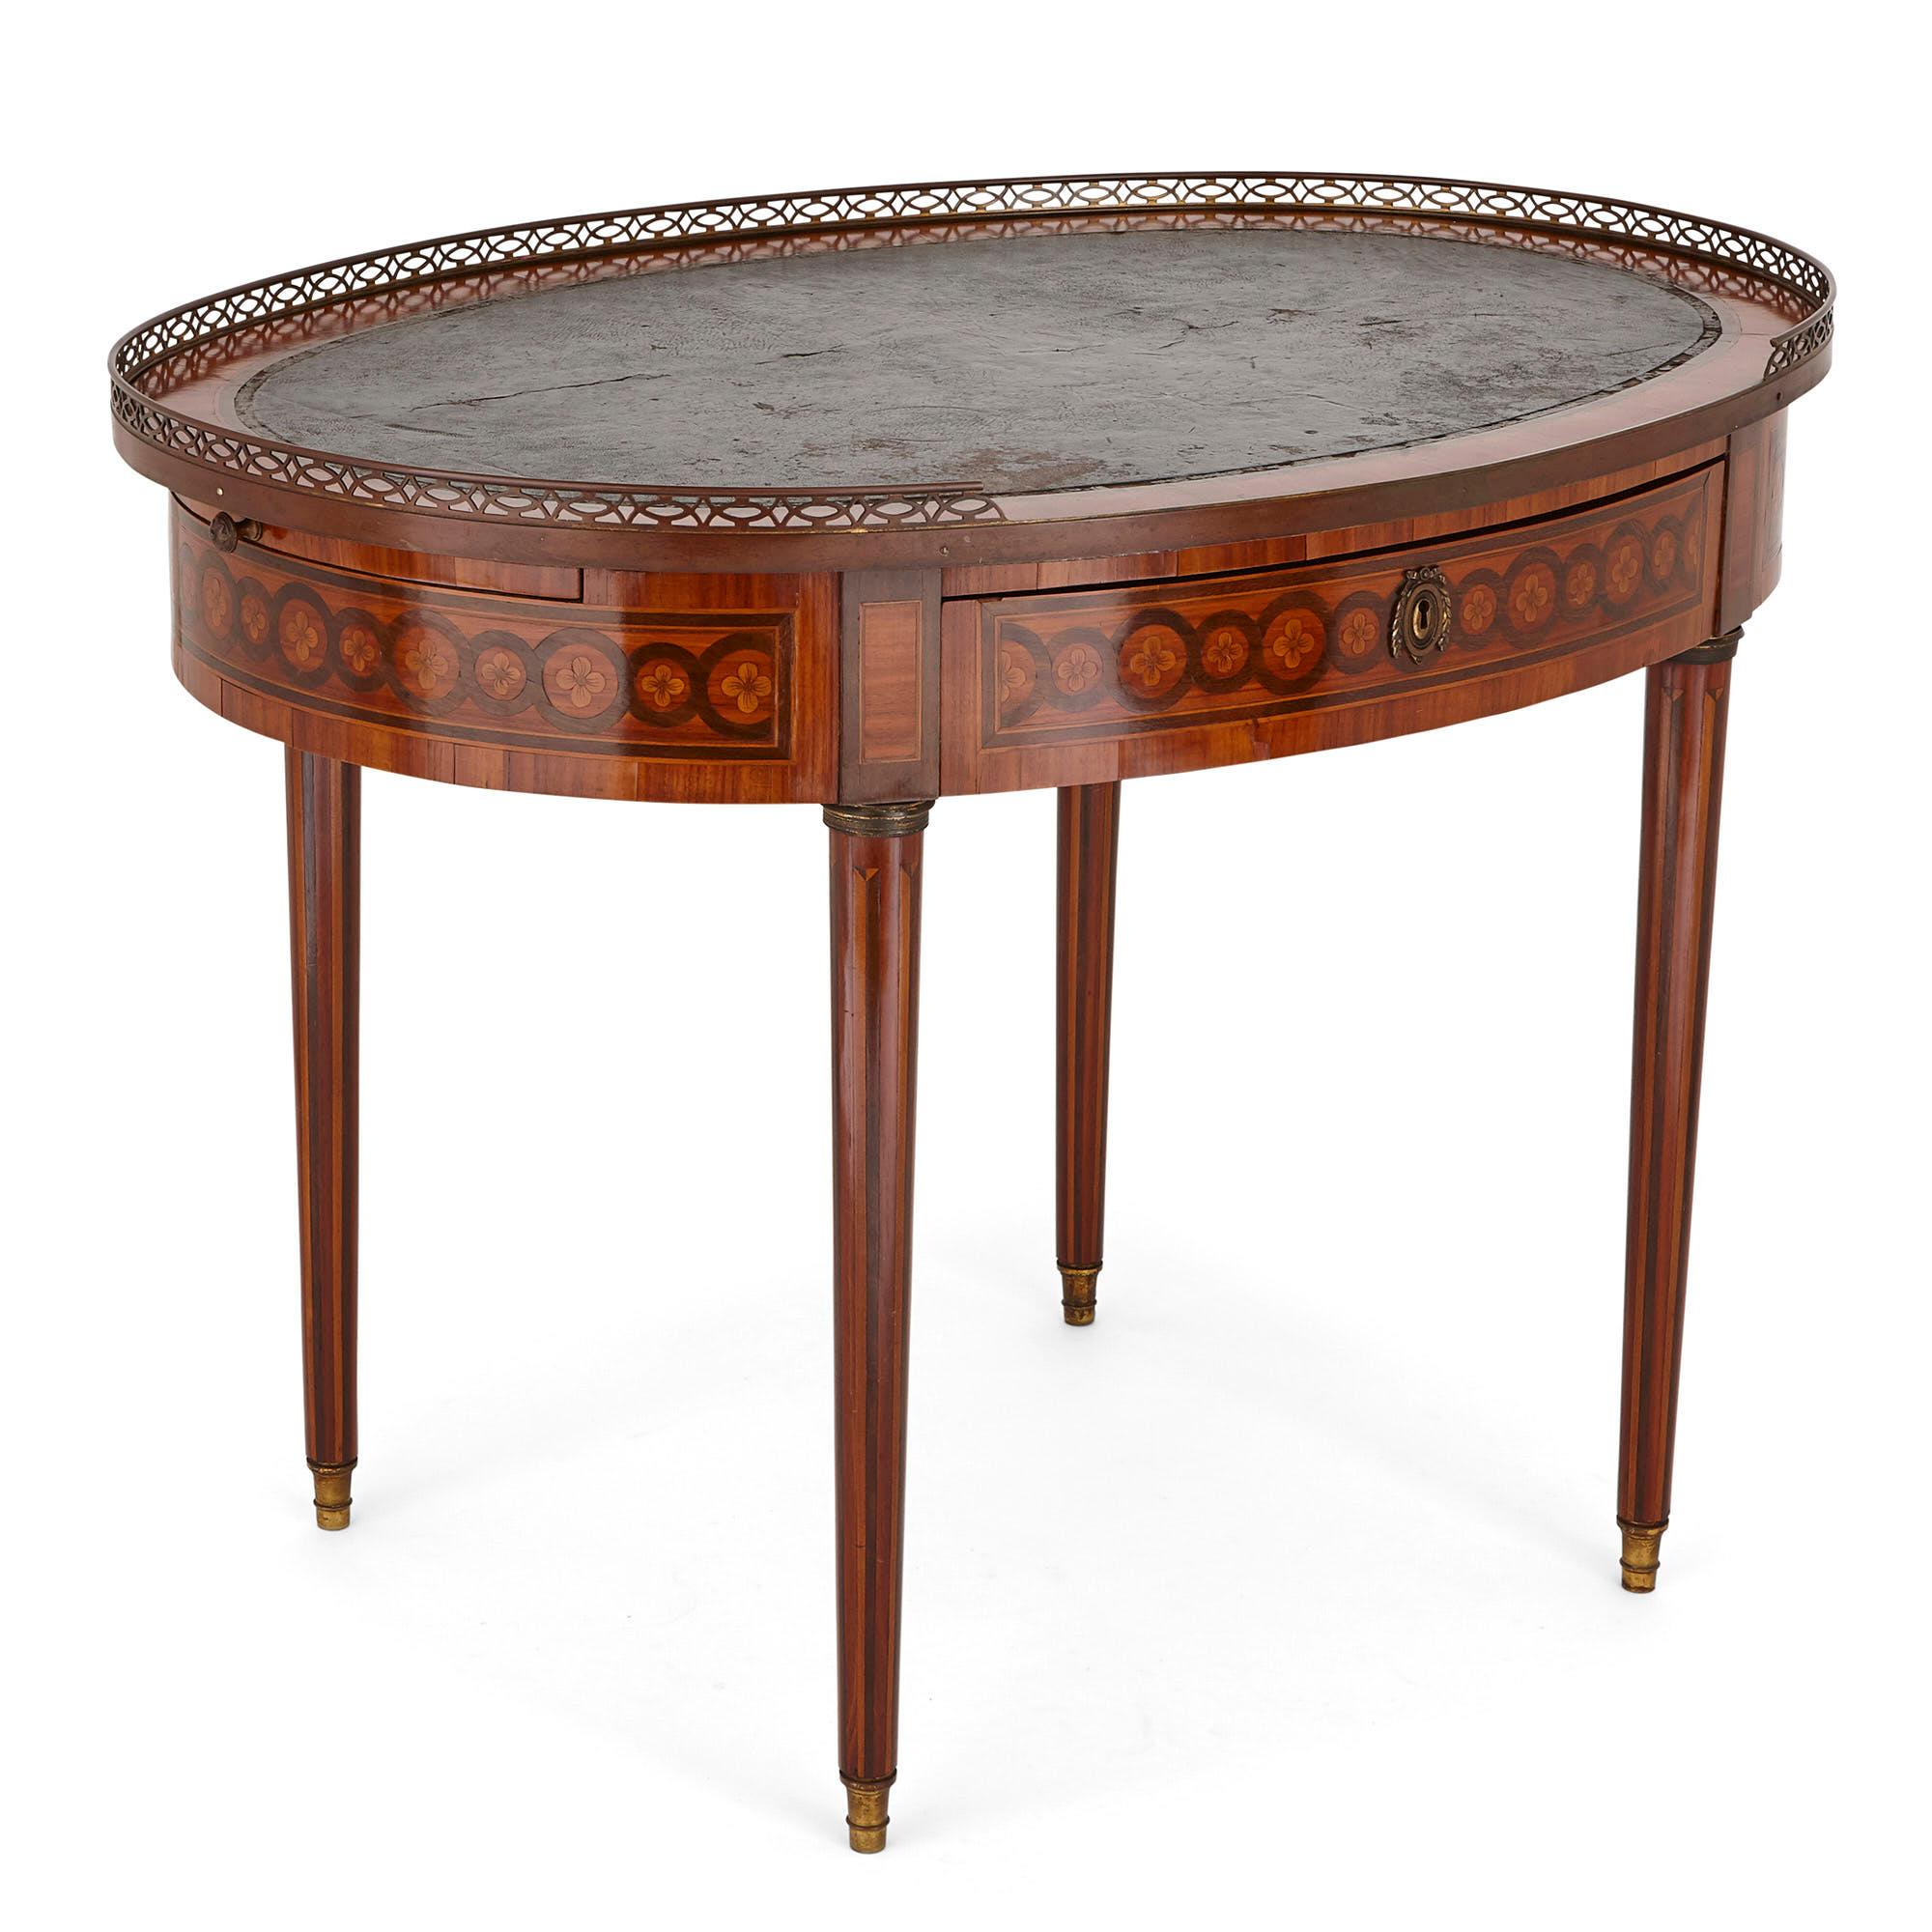 This elegant writing desk was created in France in the late 18th century, during the reign of King Louis XVI (1774-1792). The desk is designed in a refined neoclassical style which was fashionable in this period.

The walnut writing desk is